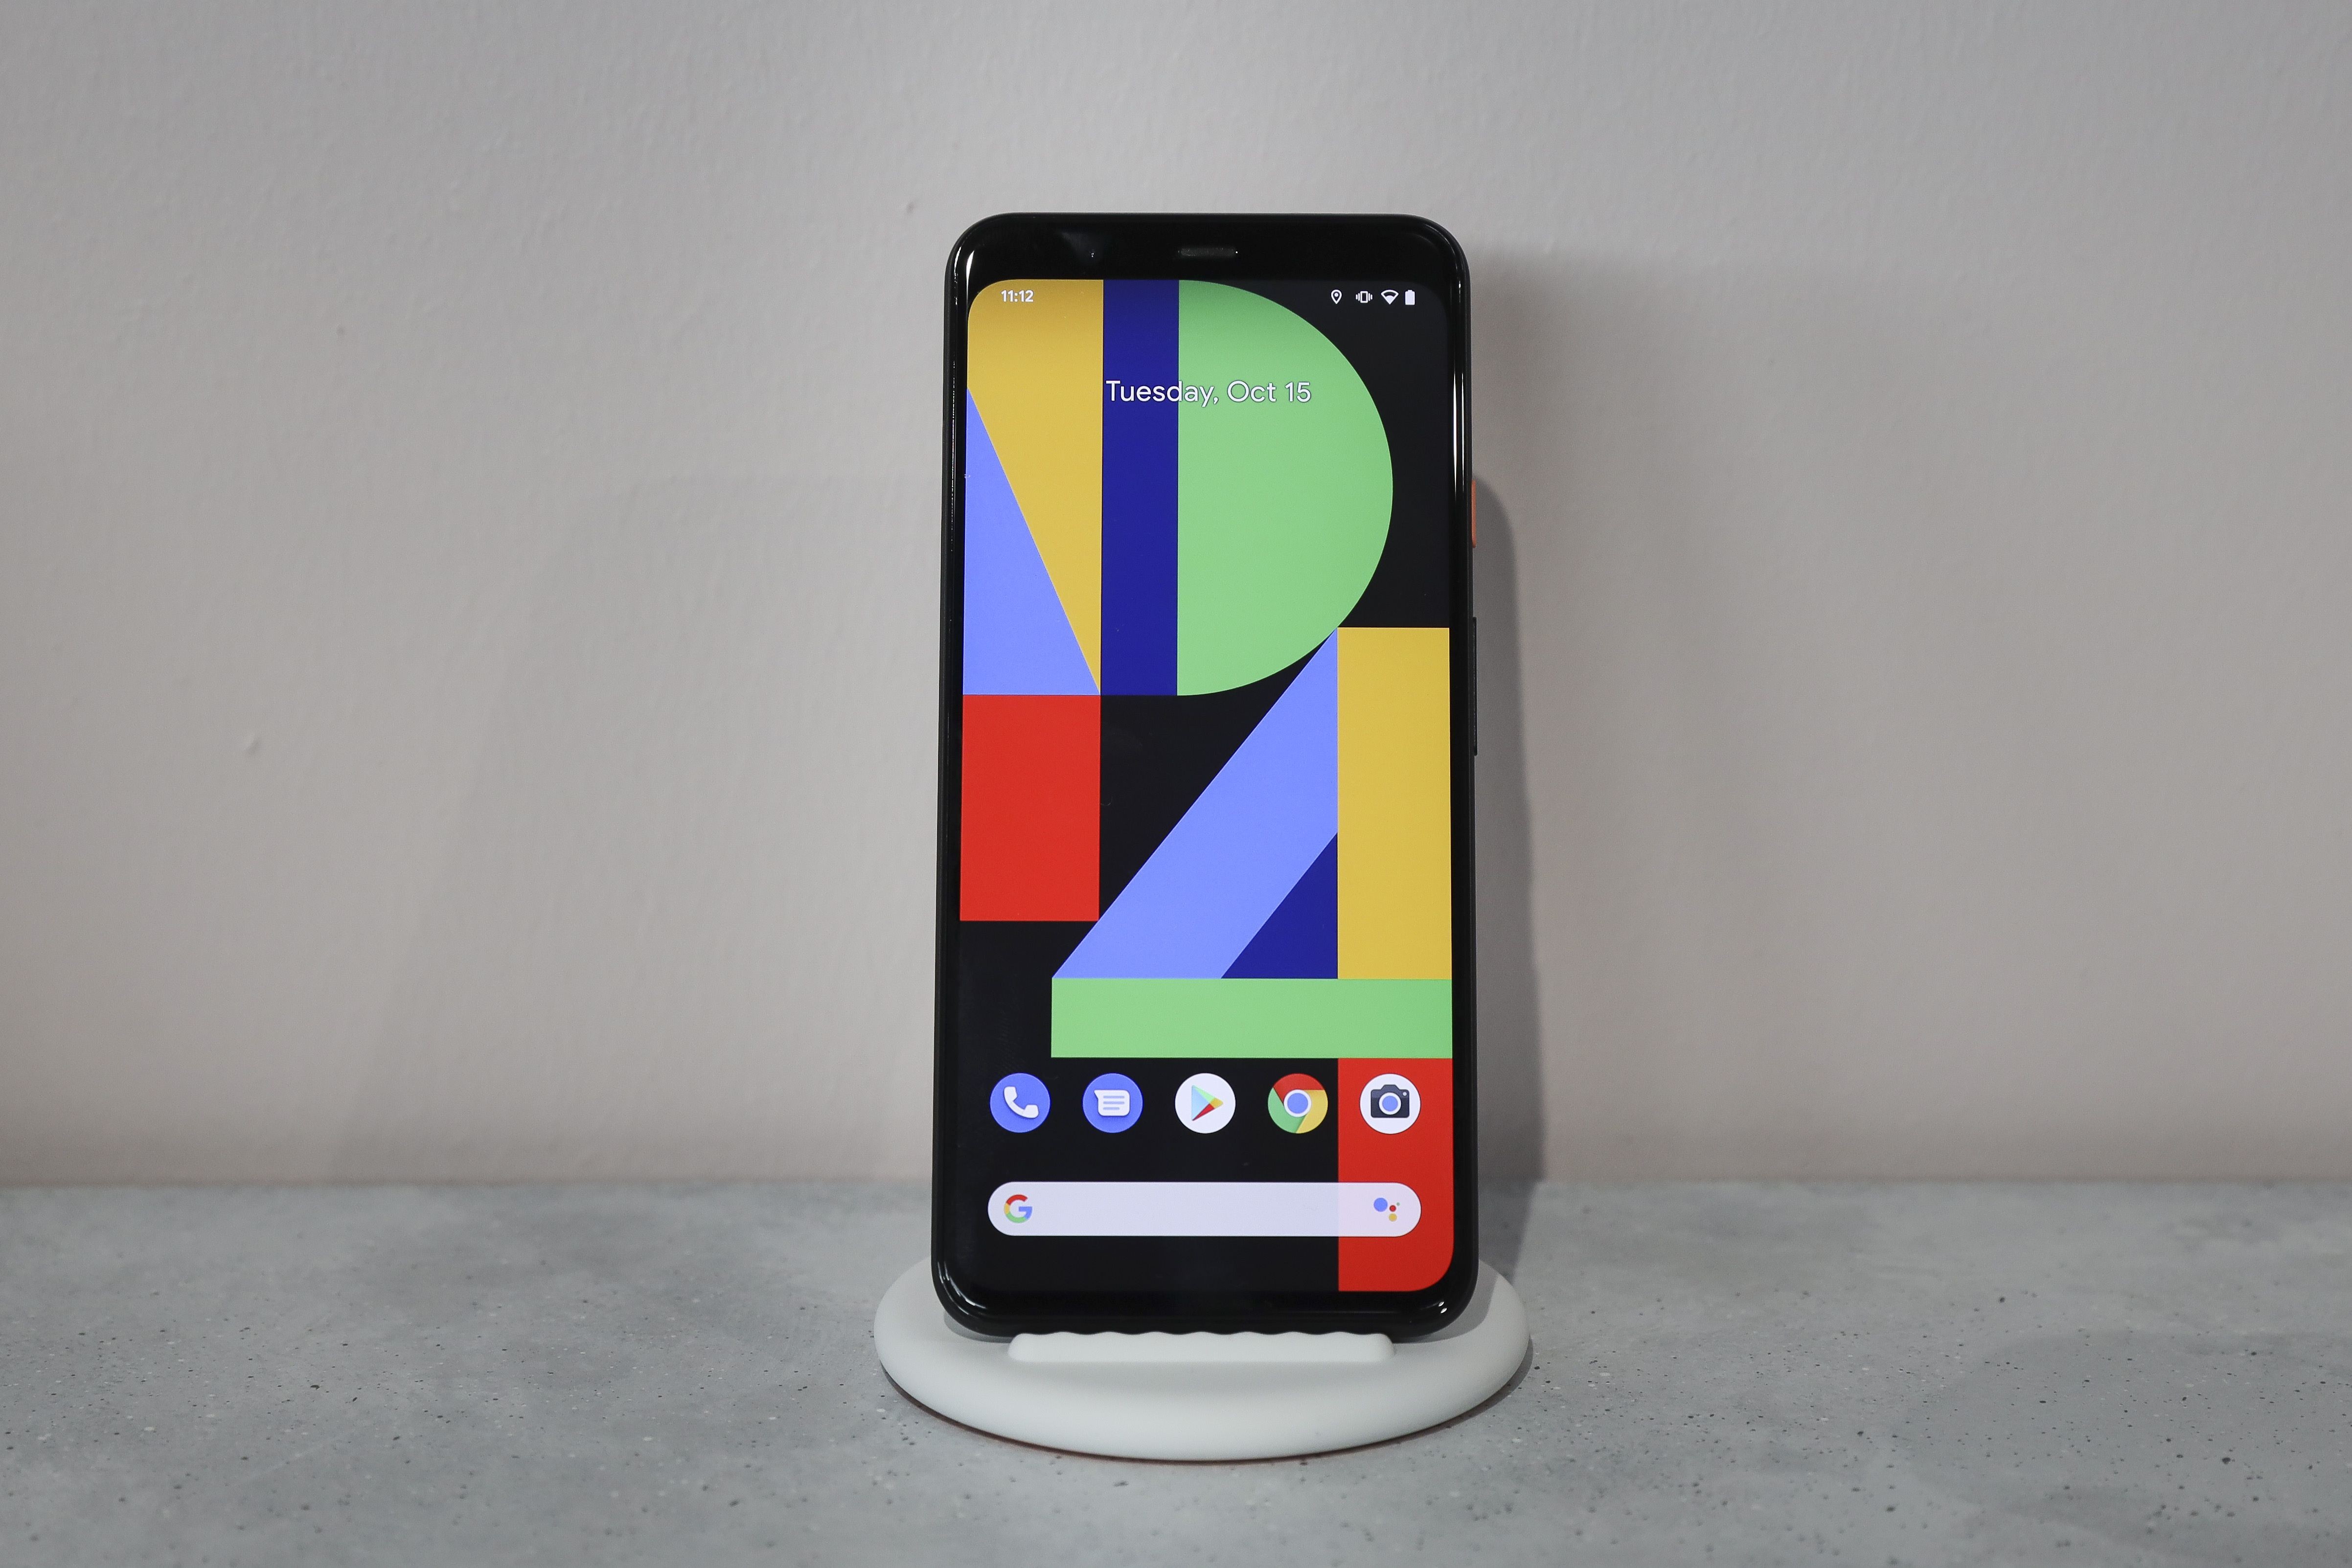 The new Google Pixel 4 and Pixel 4 XL come packed with new functions, such as a great face unlock feature and a stunning telephoto lens, but the looks lose out to rivals like Huawei and Samsung. Photo: AFP